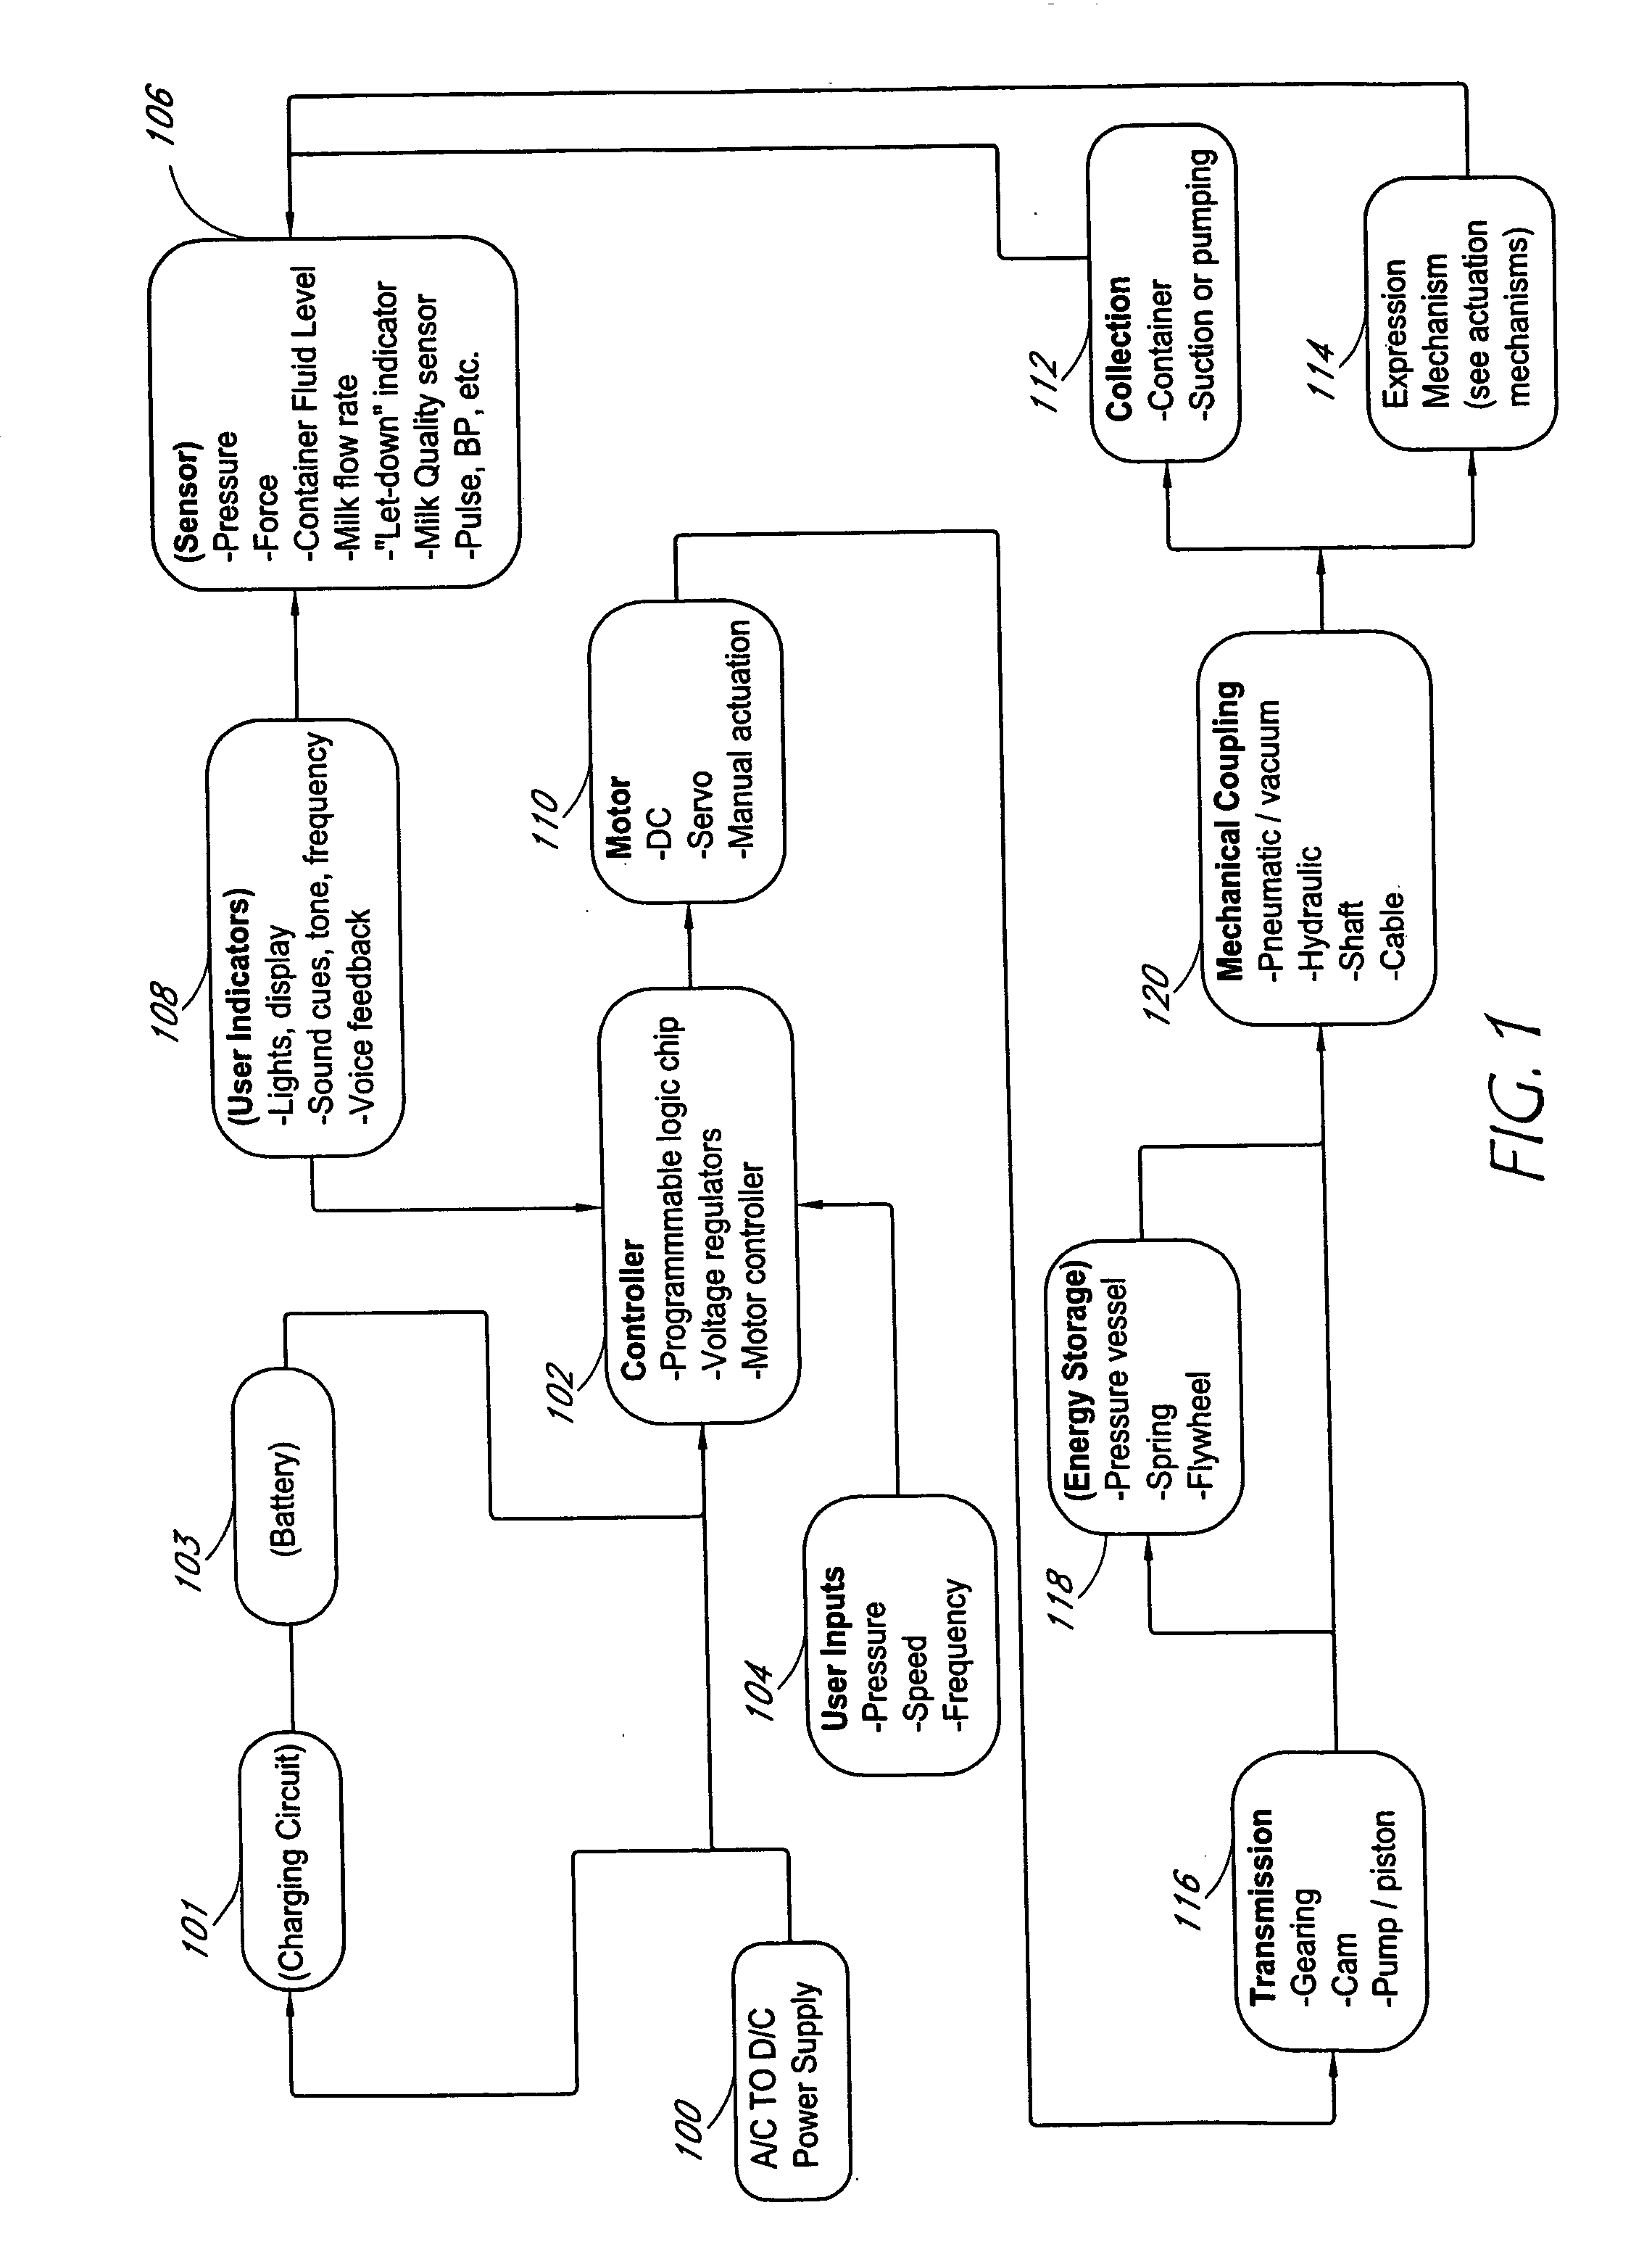 Breast milk expression system and method